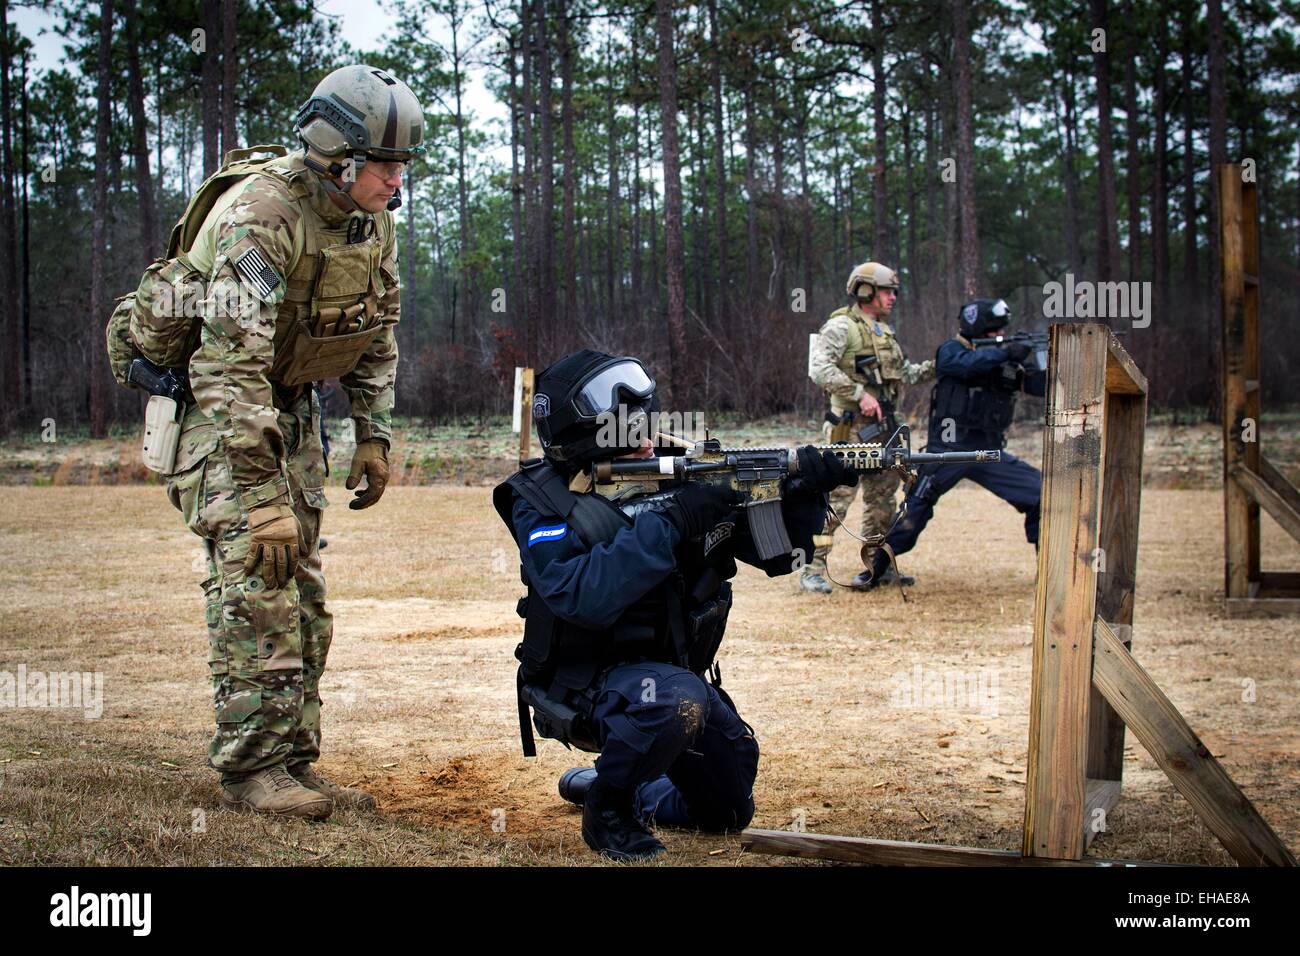 A US Army Green Beret soldier special forces advises Honduran TIGRES soldiers as they clear a compound during training February 24, 2015 at Eglin Air Force Base, Florida. Stock Photo